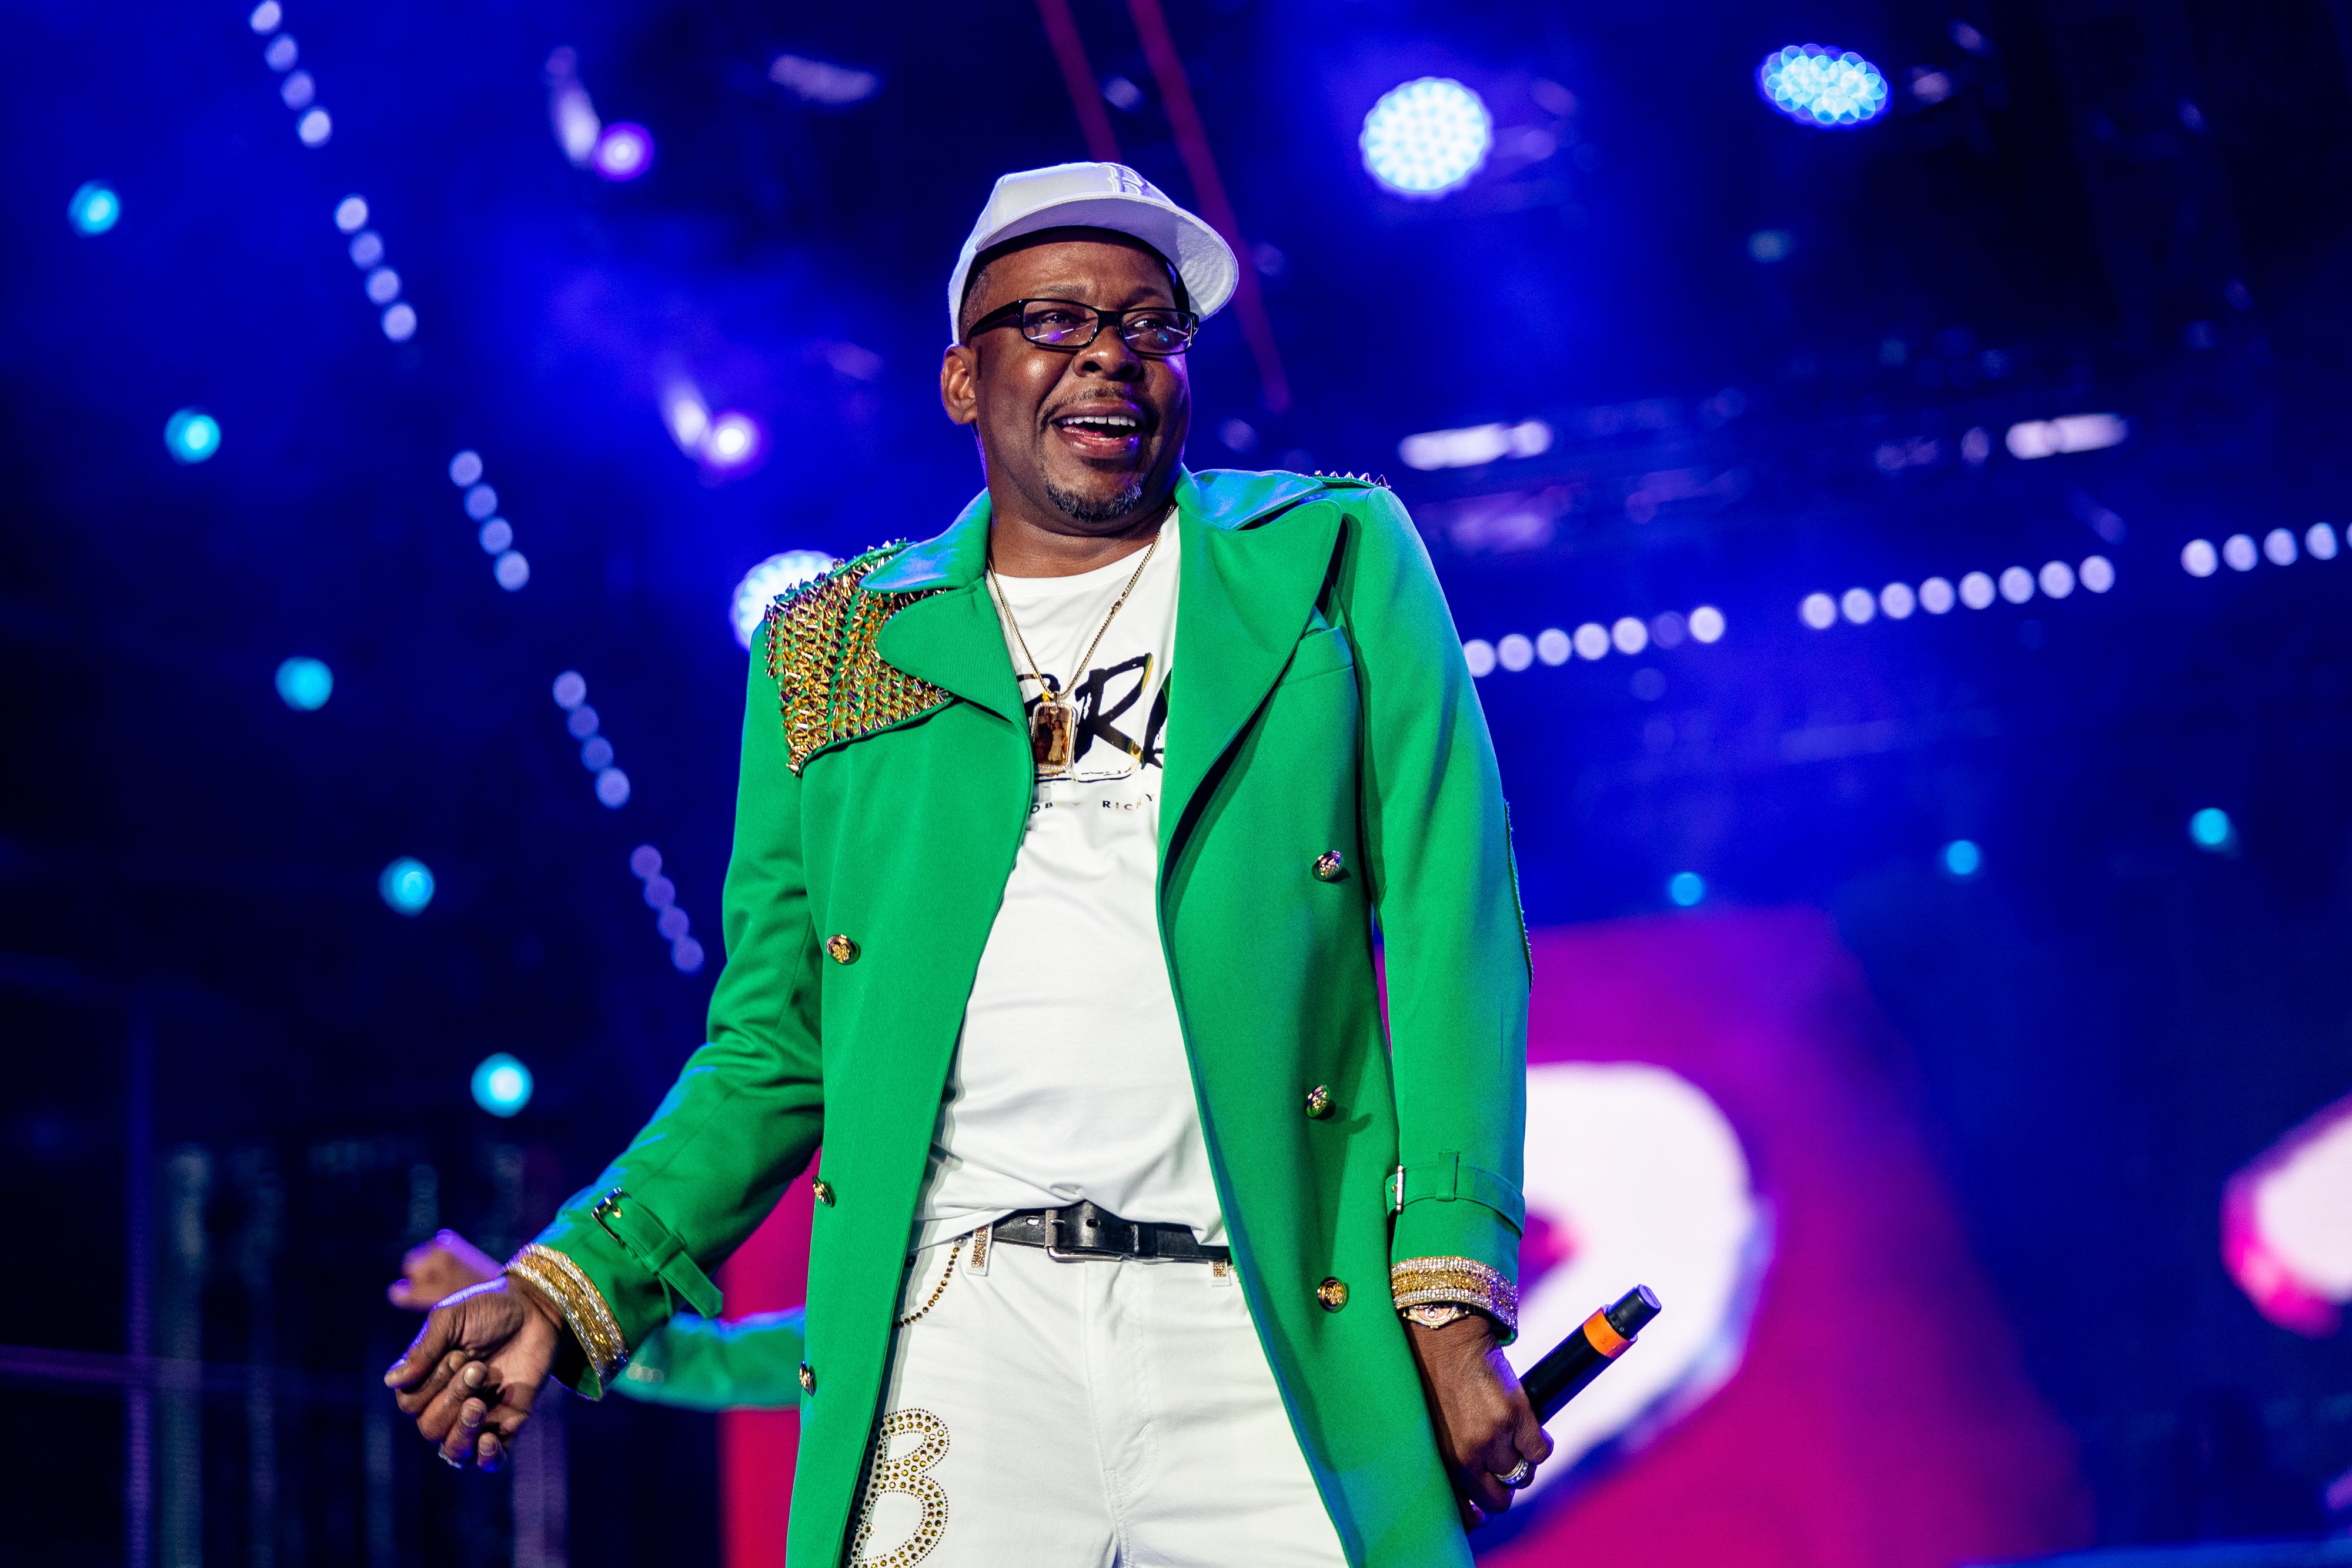 Bobby Brown Tearfully Remembers Late Daughter Bobbi Kristina In Emotional Moment At Essence Festival